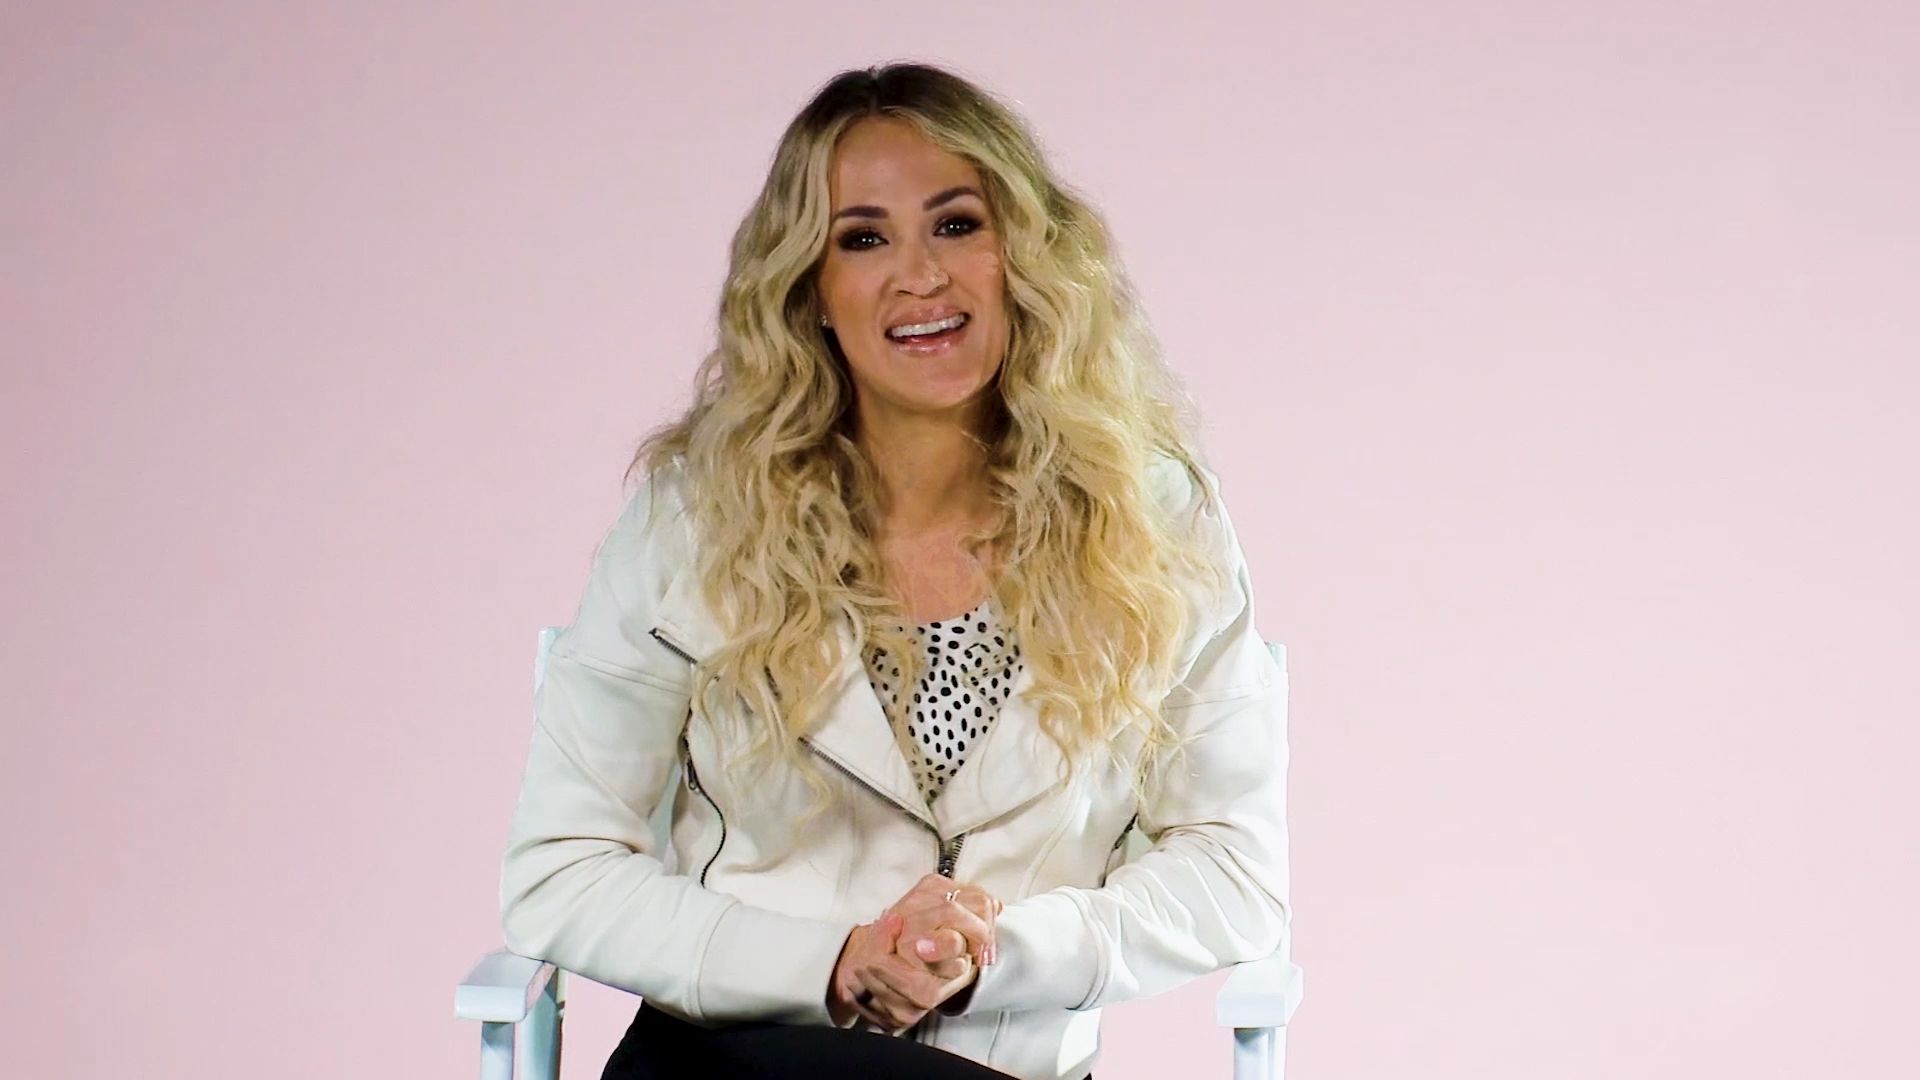 Carrie Underwood Is Sculpted Leg Goals In Short Shorts In IG Video